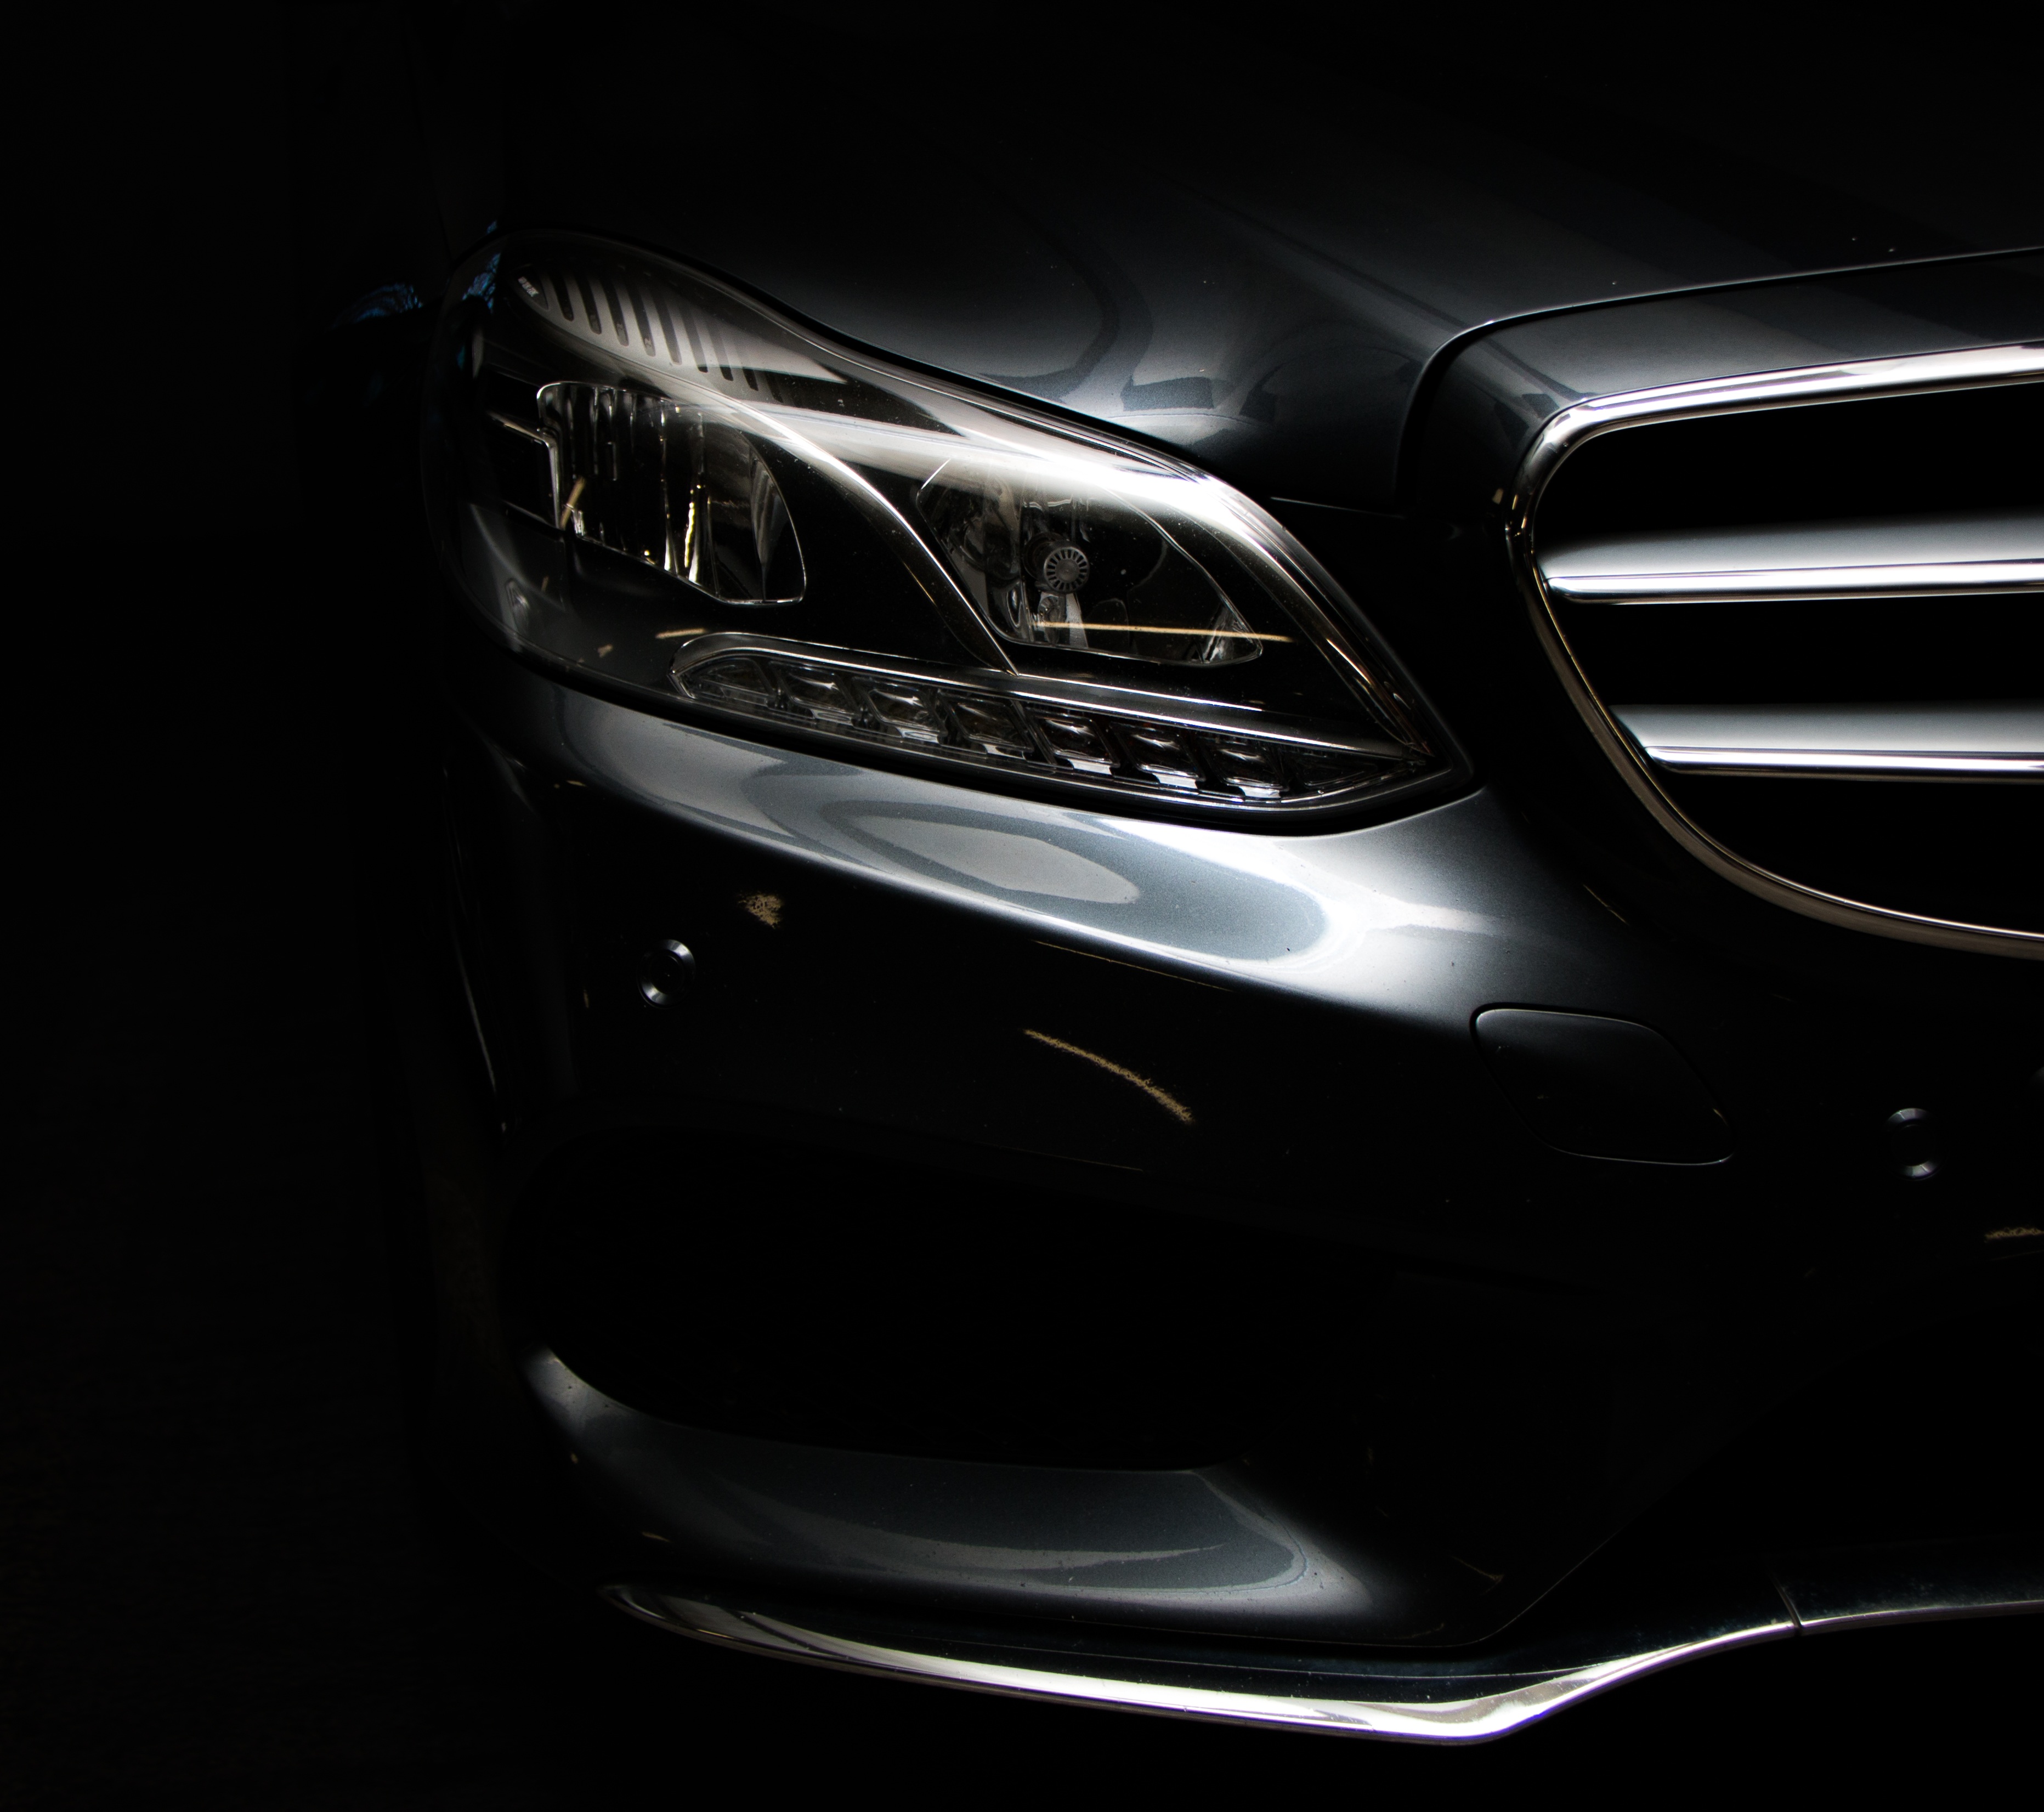 151032 download wallpaper mercedes e-class, cars, dark, front view, mercedes, headlight, bumper, silver, silvery screensavers and pictures for free